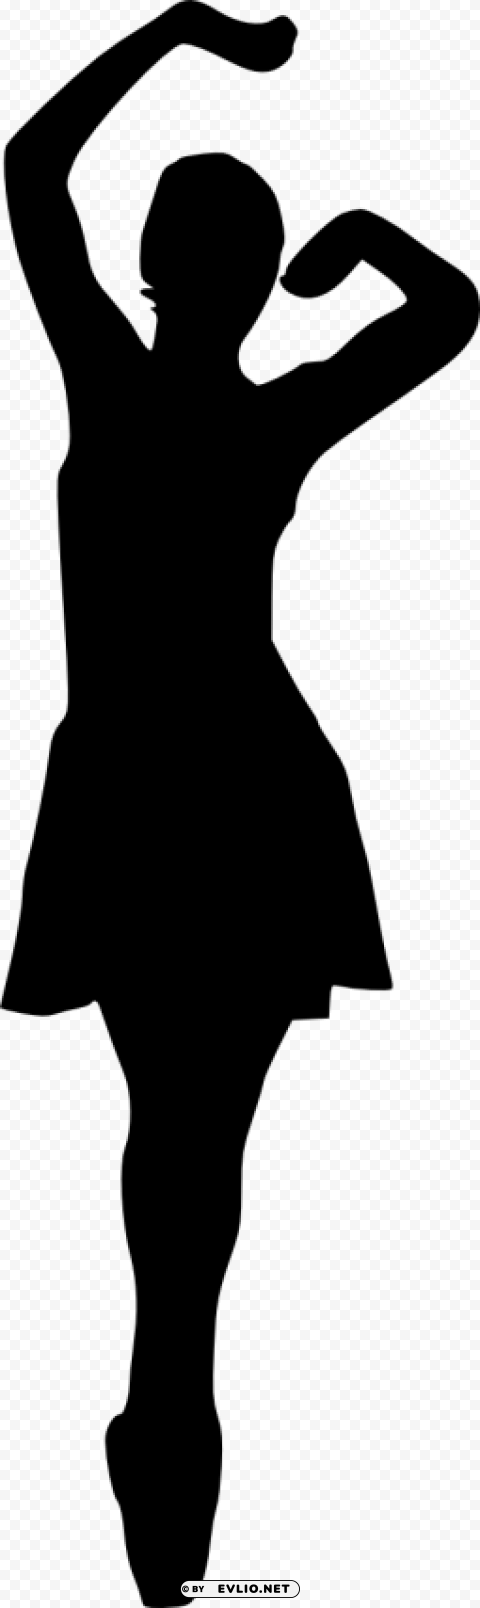 ballerina silhouette Transparent PNG images free download